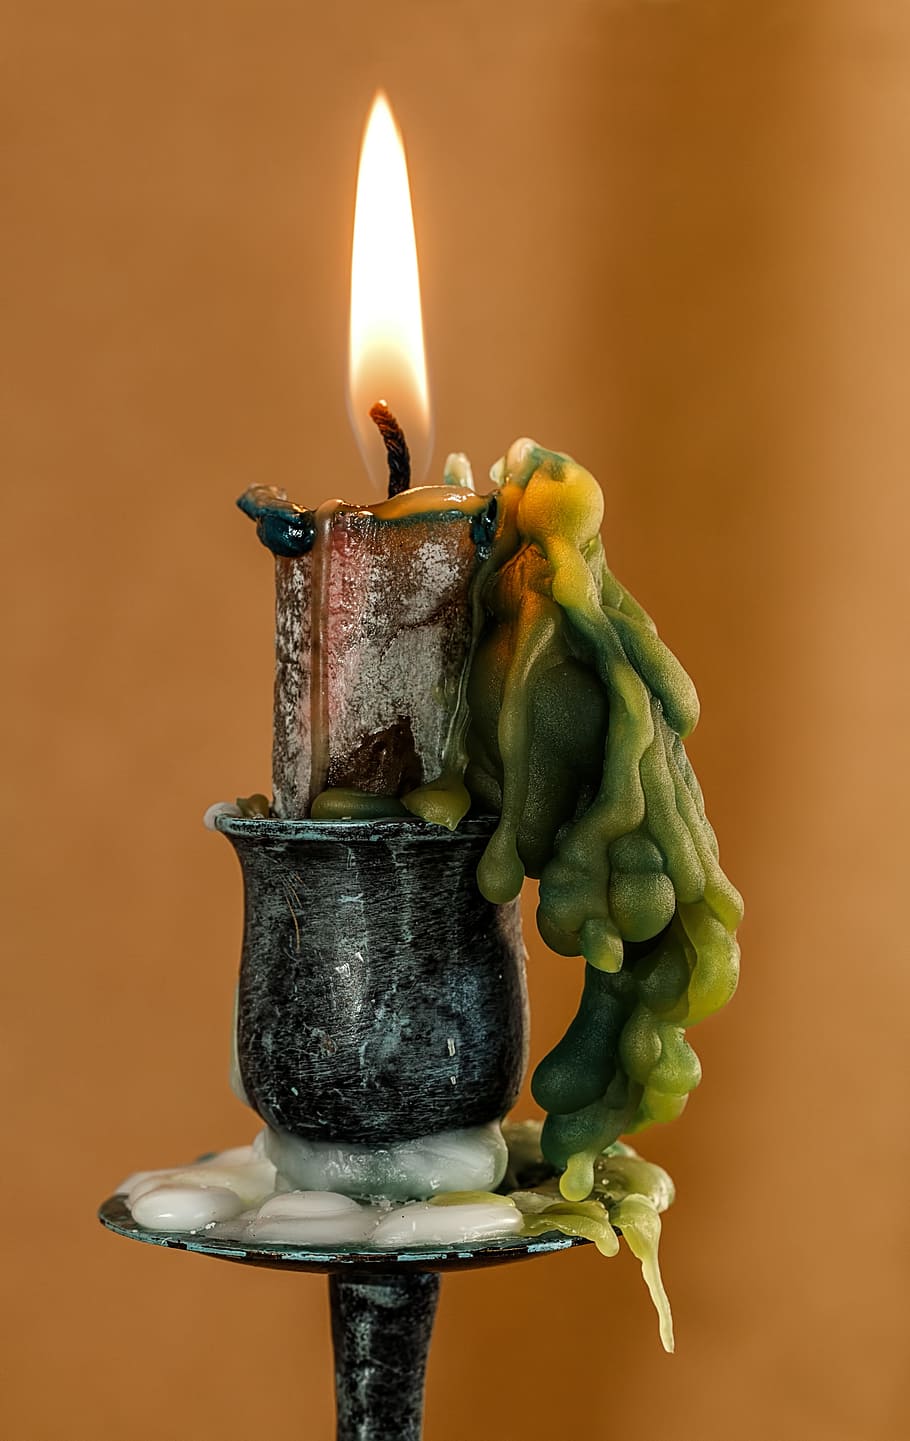 candle, light, lantern, fire, wax, burning, flame, close-up, fire - natural phenomenon, heat - temperature